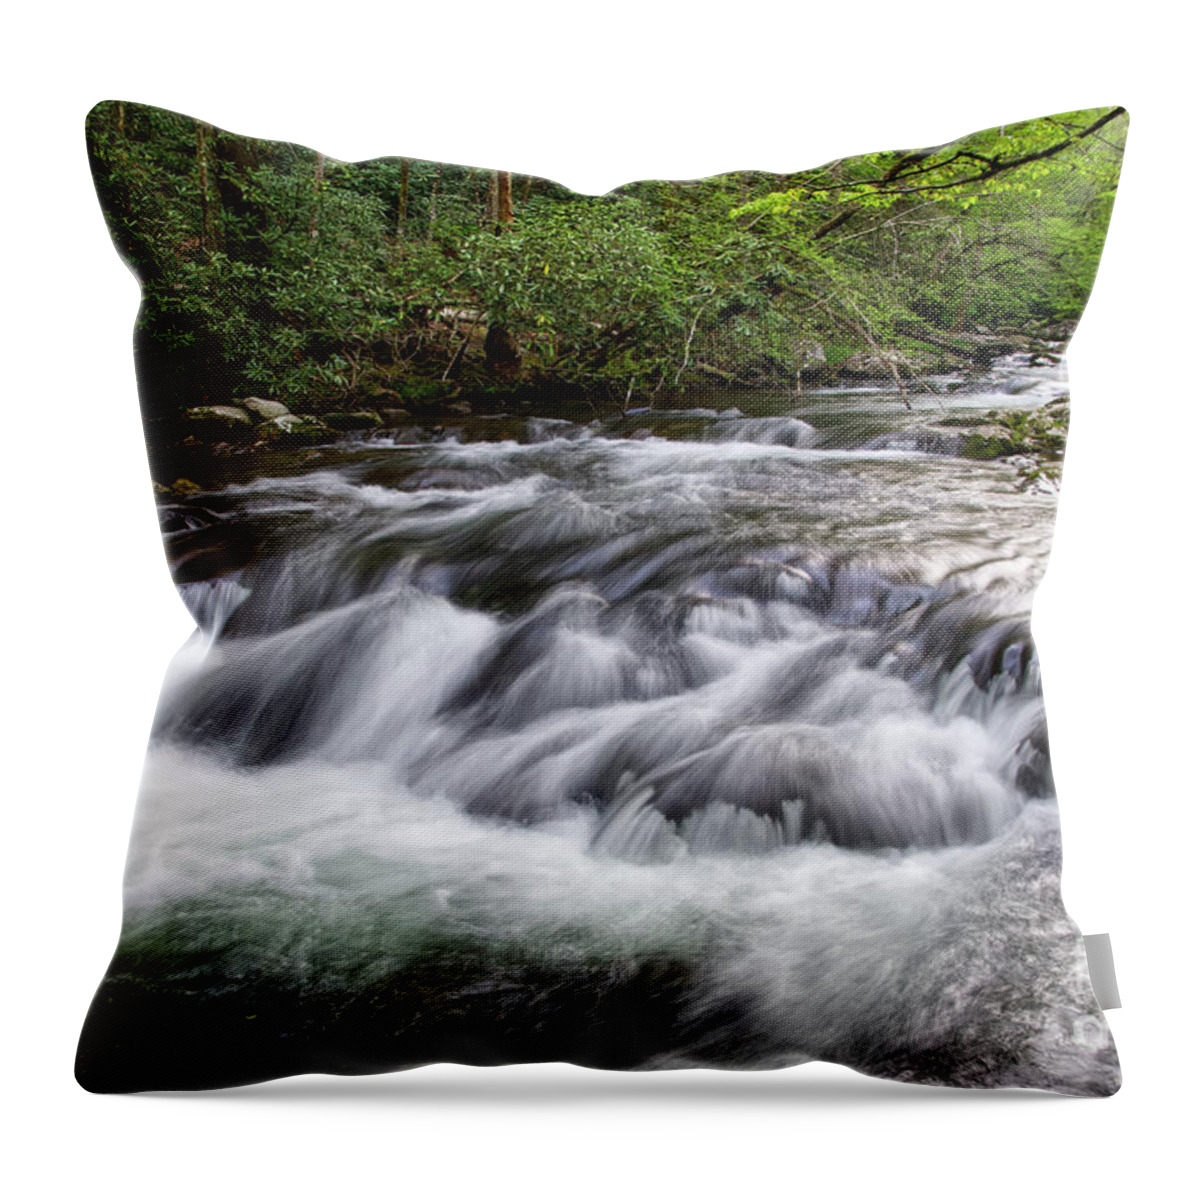 Middle Prong Trail Throw Pillow featuring the photograph Middle Prong Little River 9 by Phil Perkins